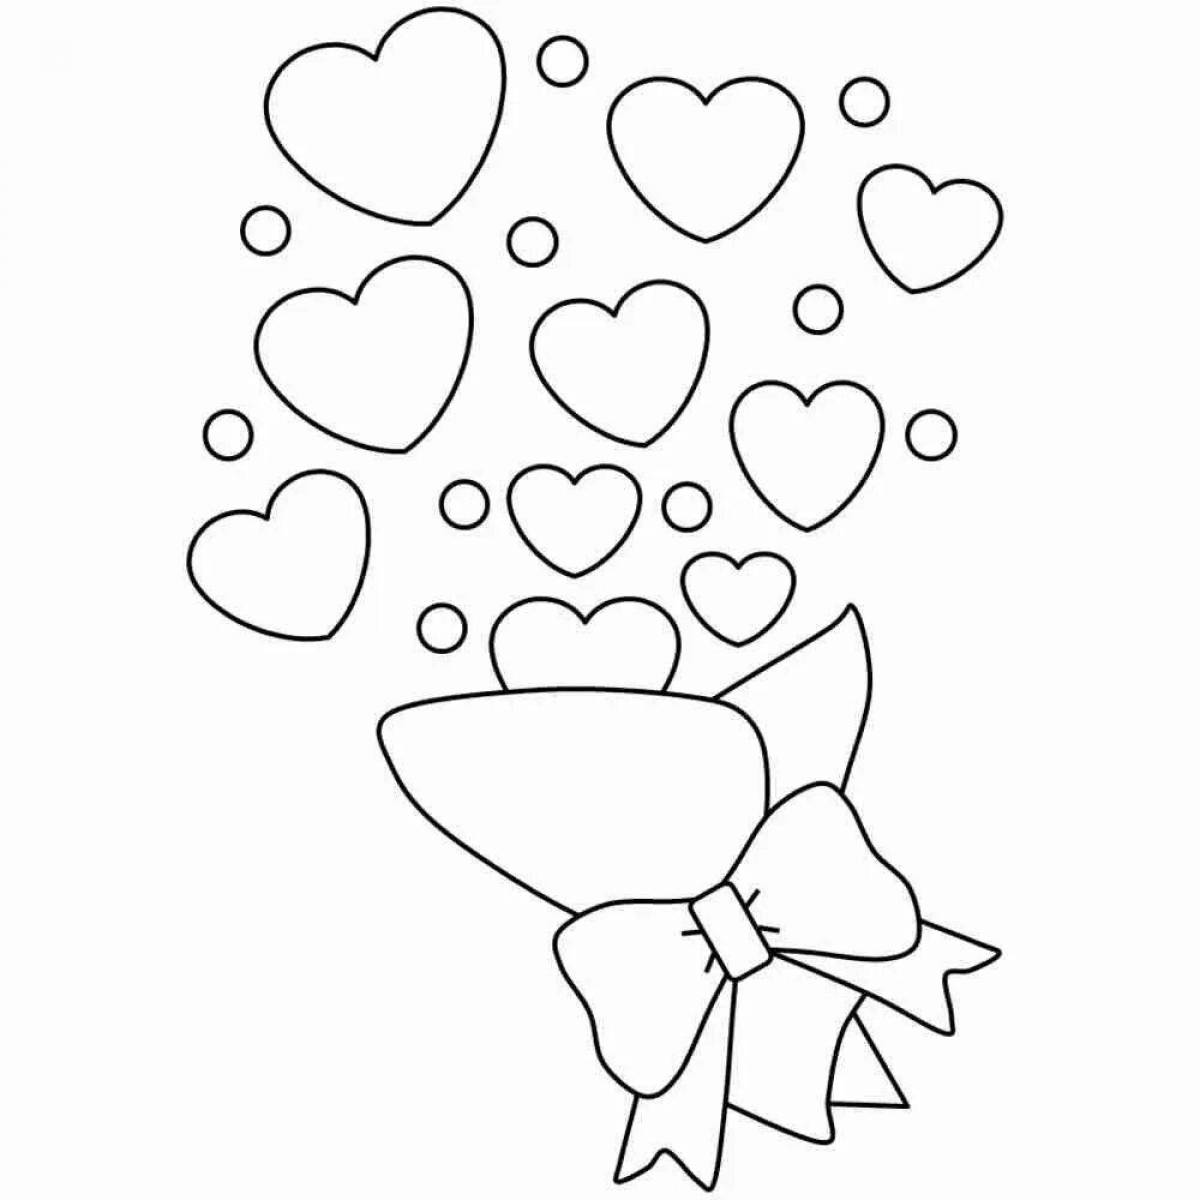 Adorable heart coloring page for mom